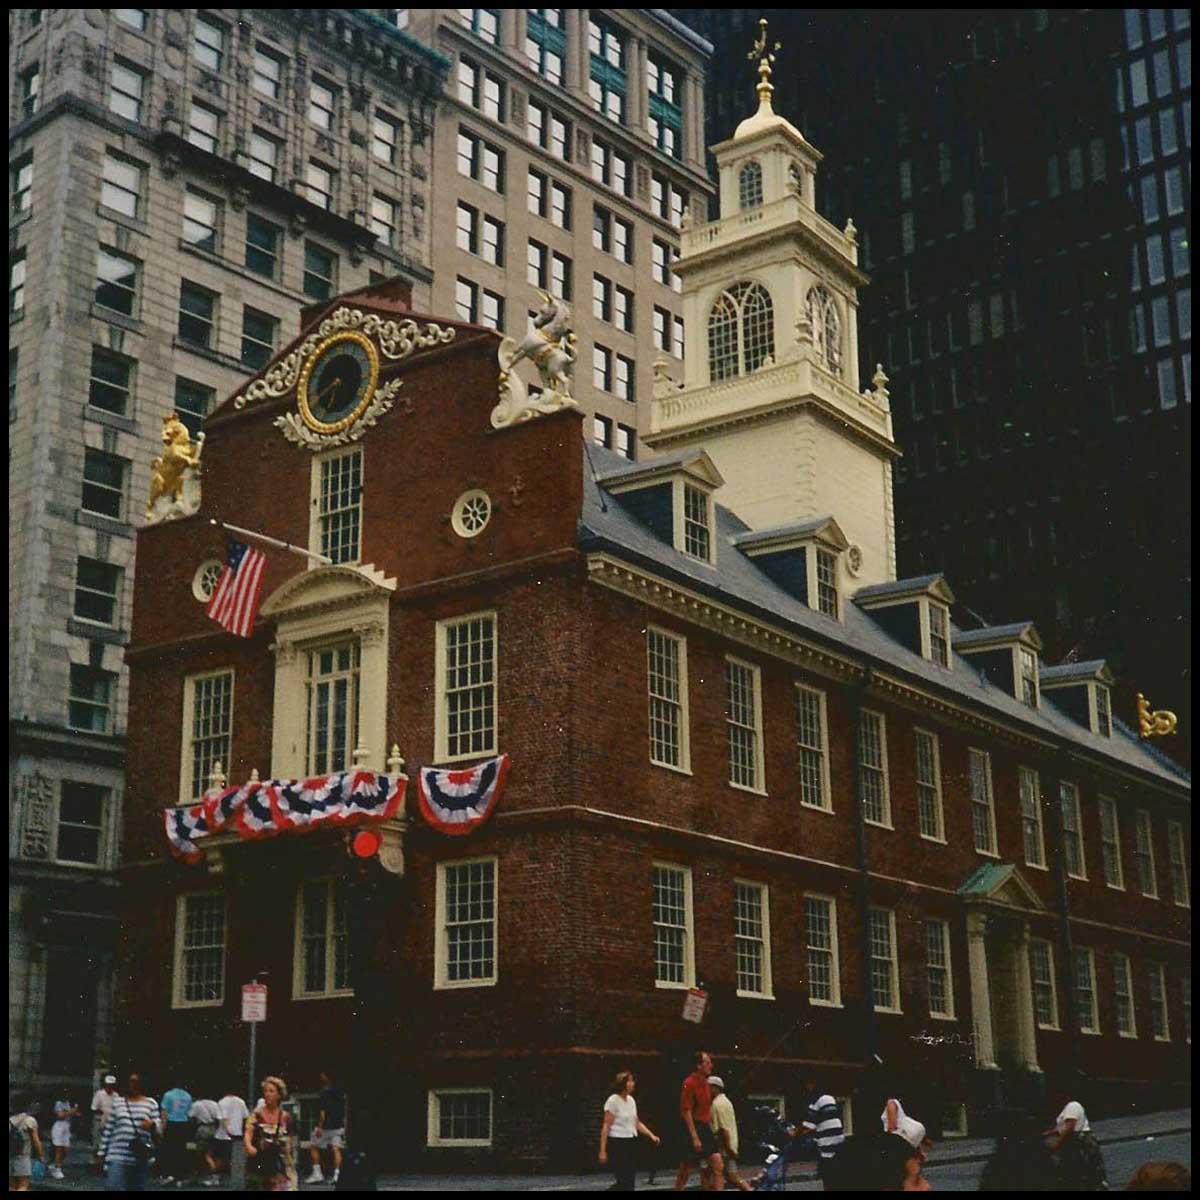 photo of Boston Old State House, a brick building with off-white tower